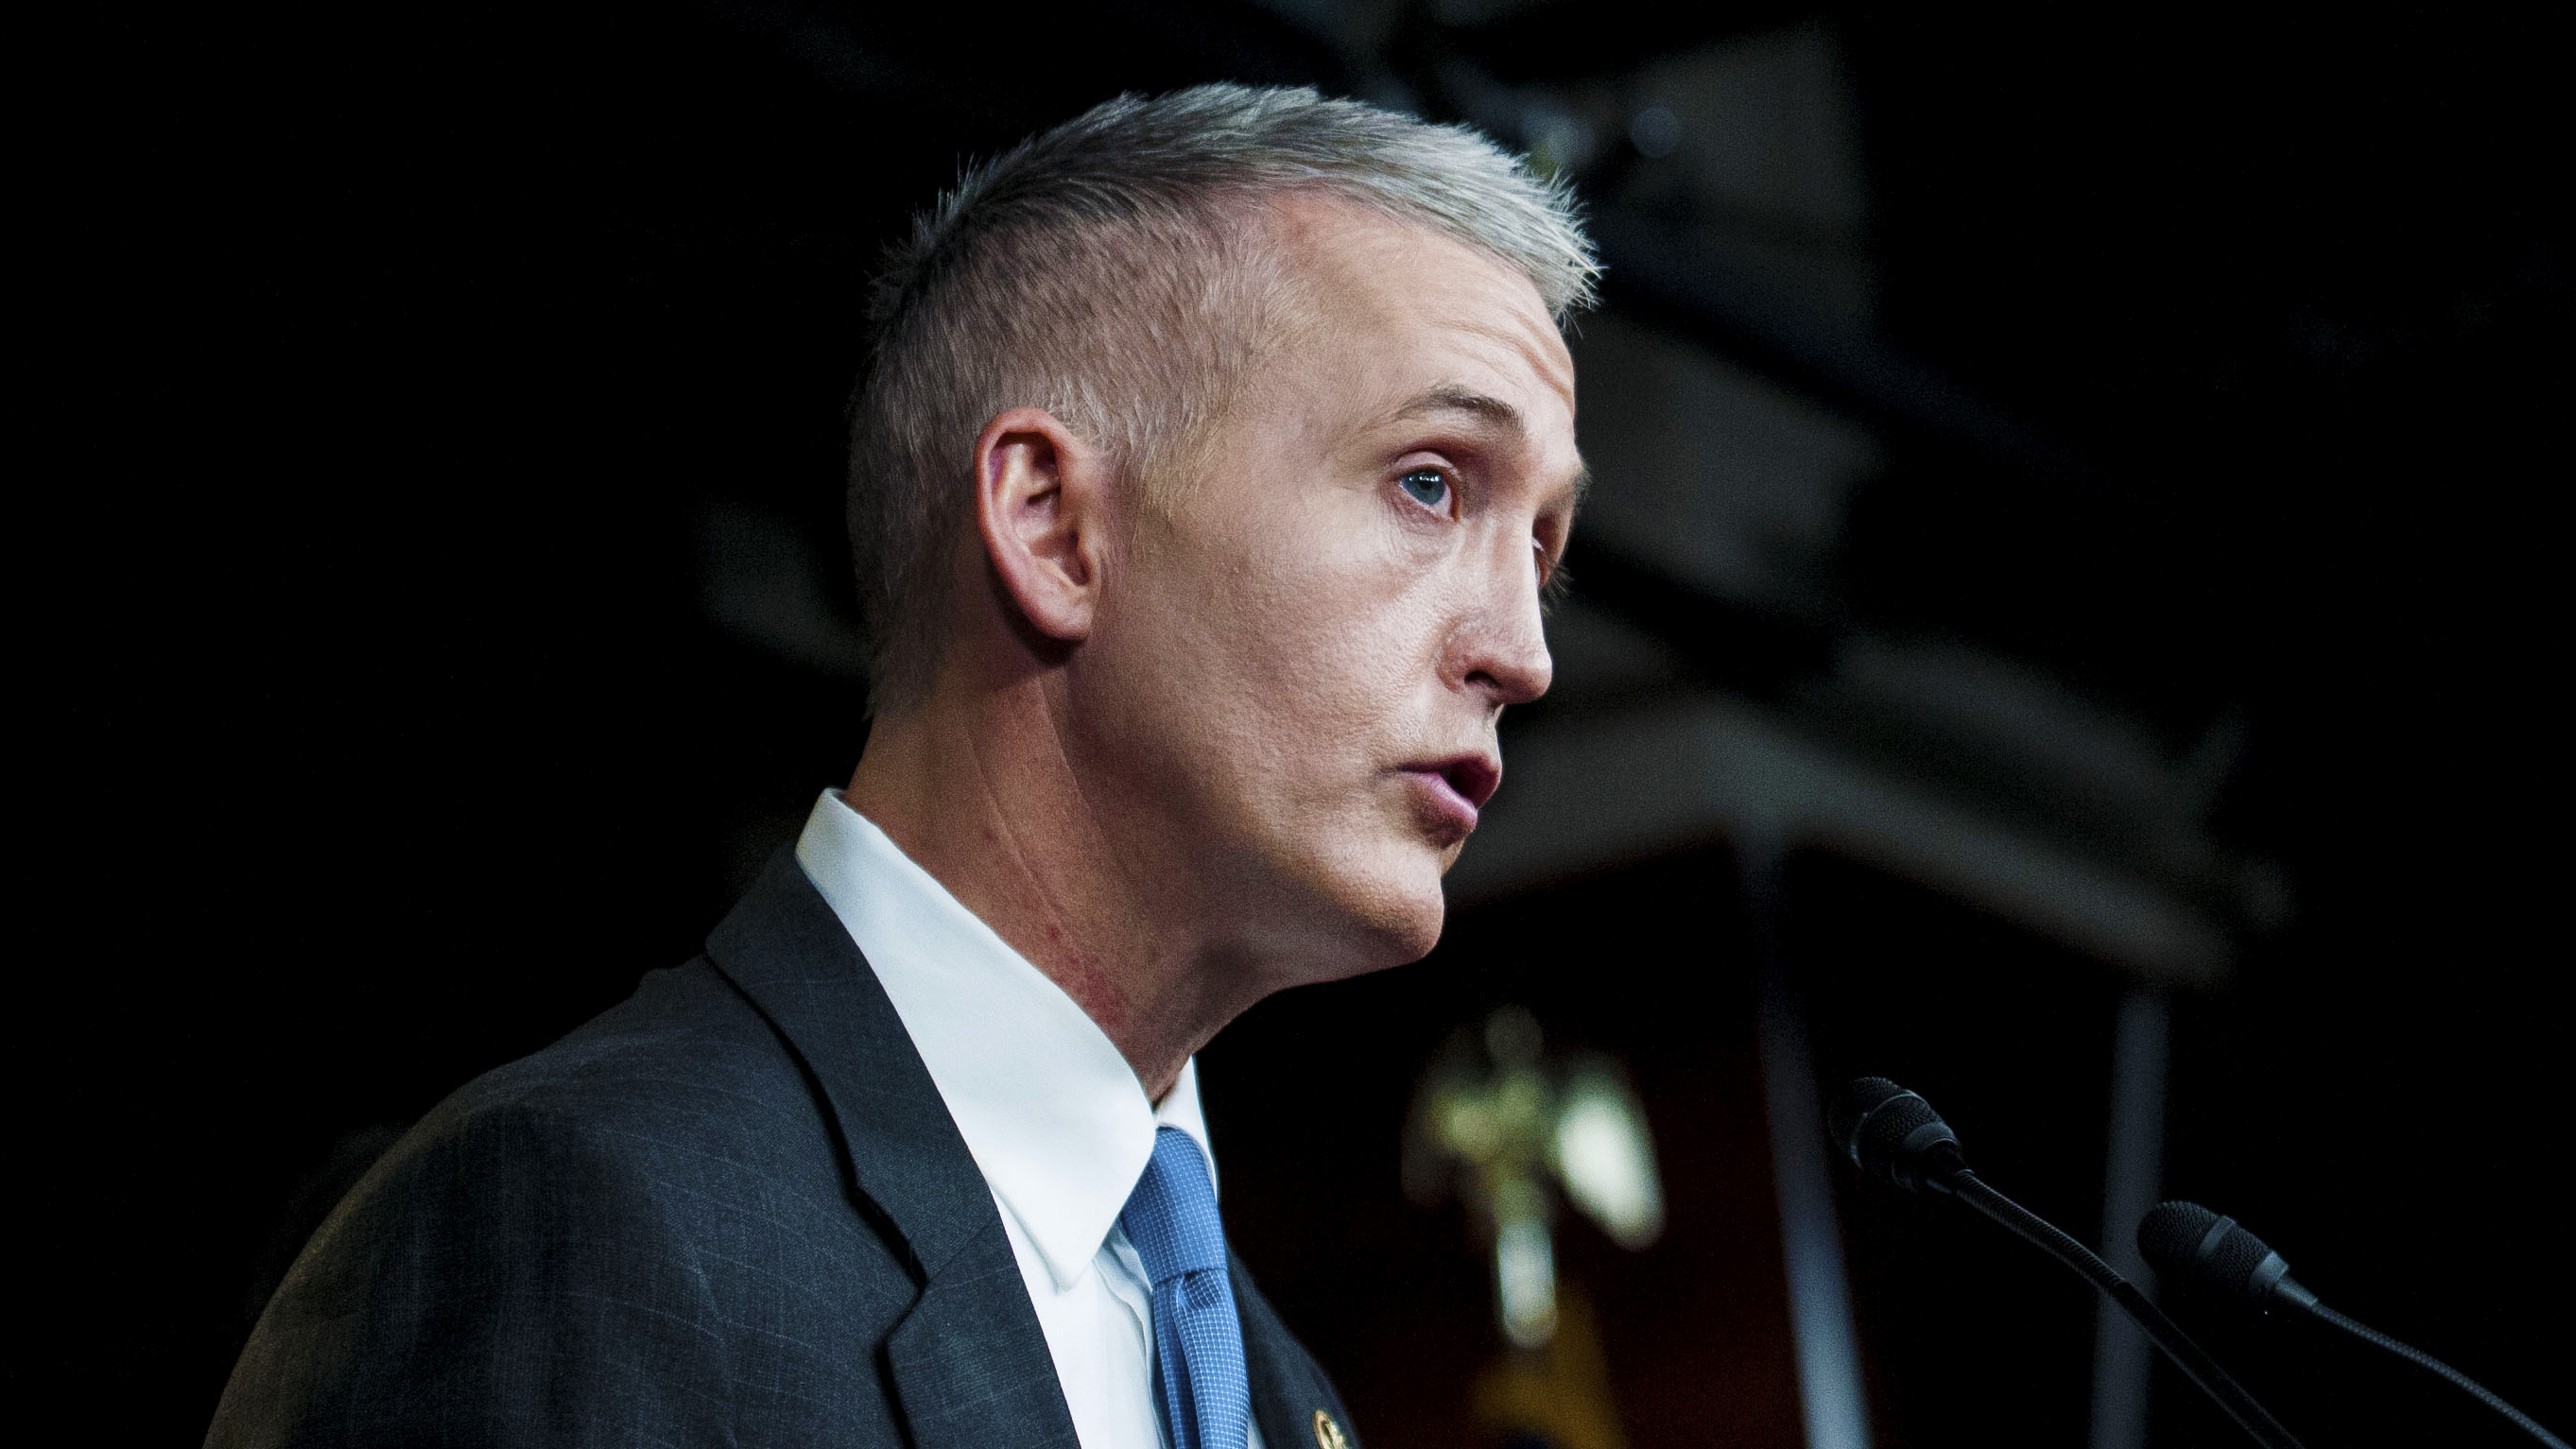 Trey Gowdy: Alvin Bragg Excited to Prosecute Trump